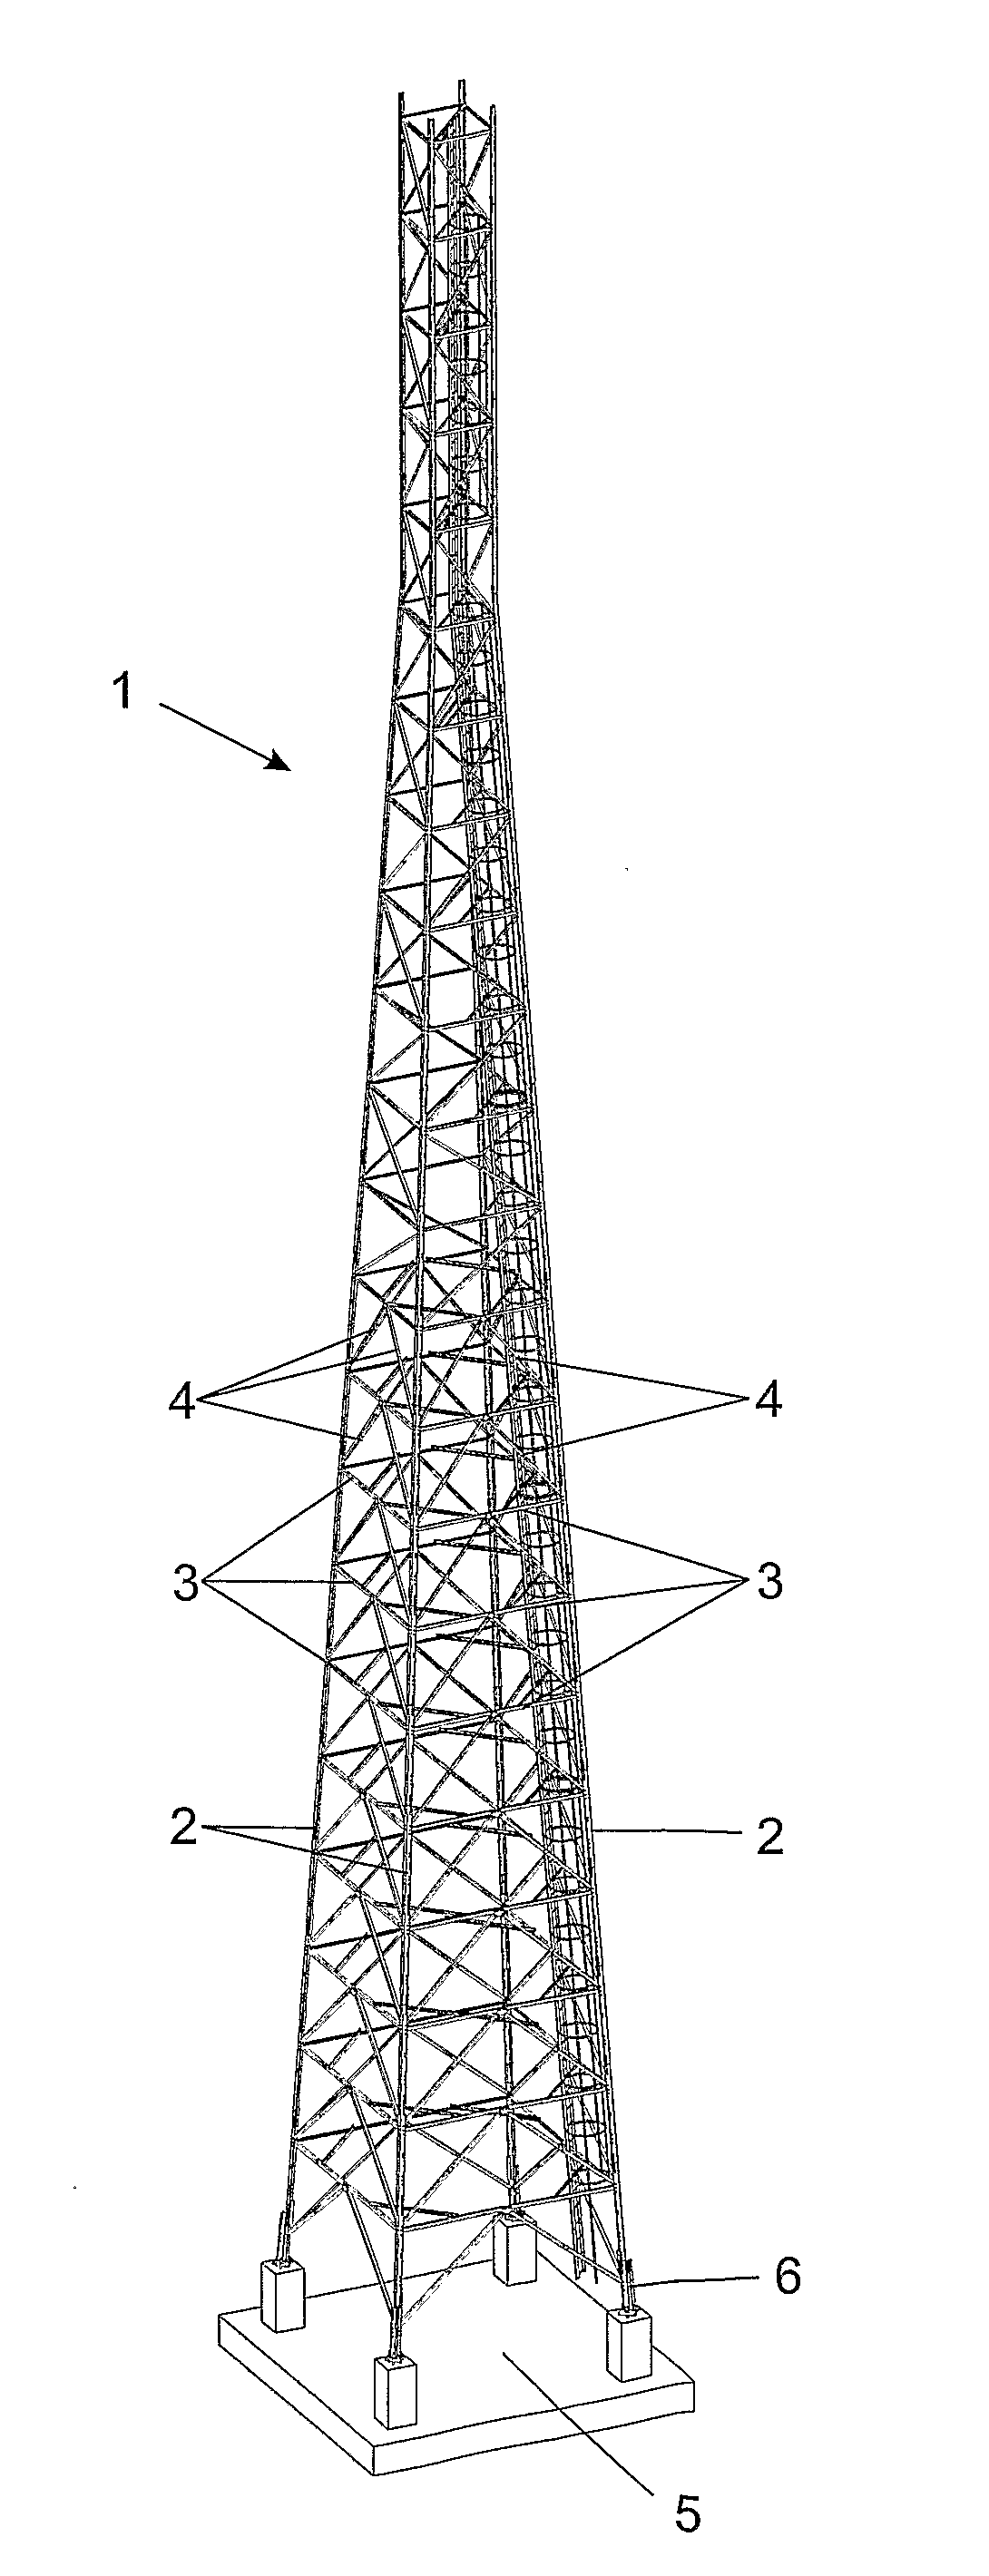 Upgradable lattice tower and components thereof